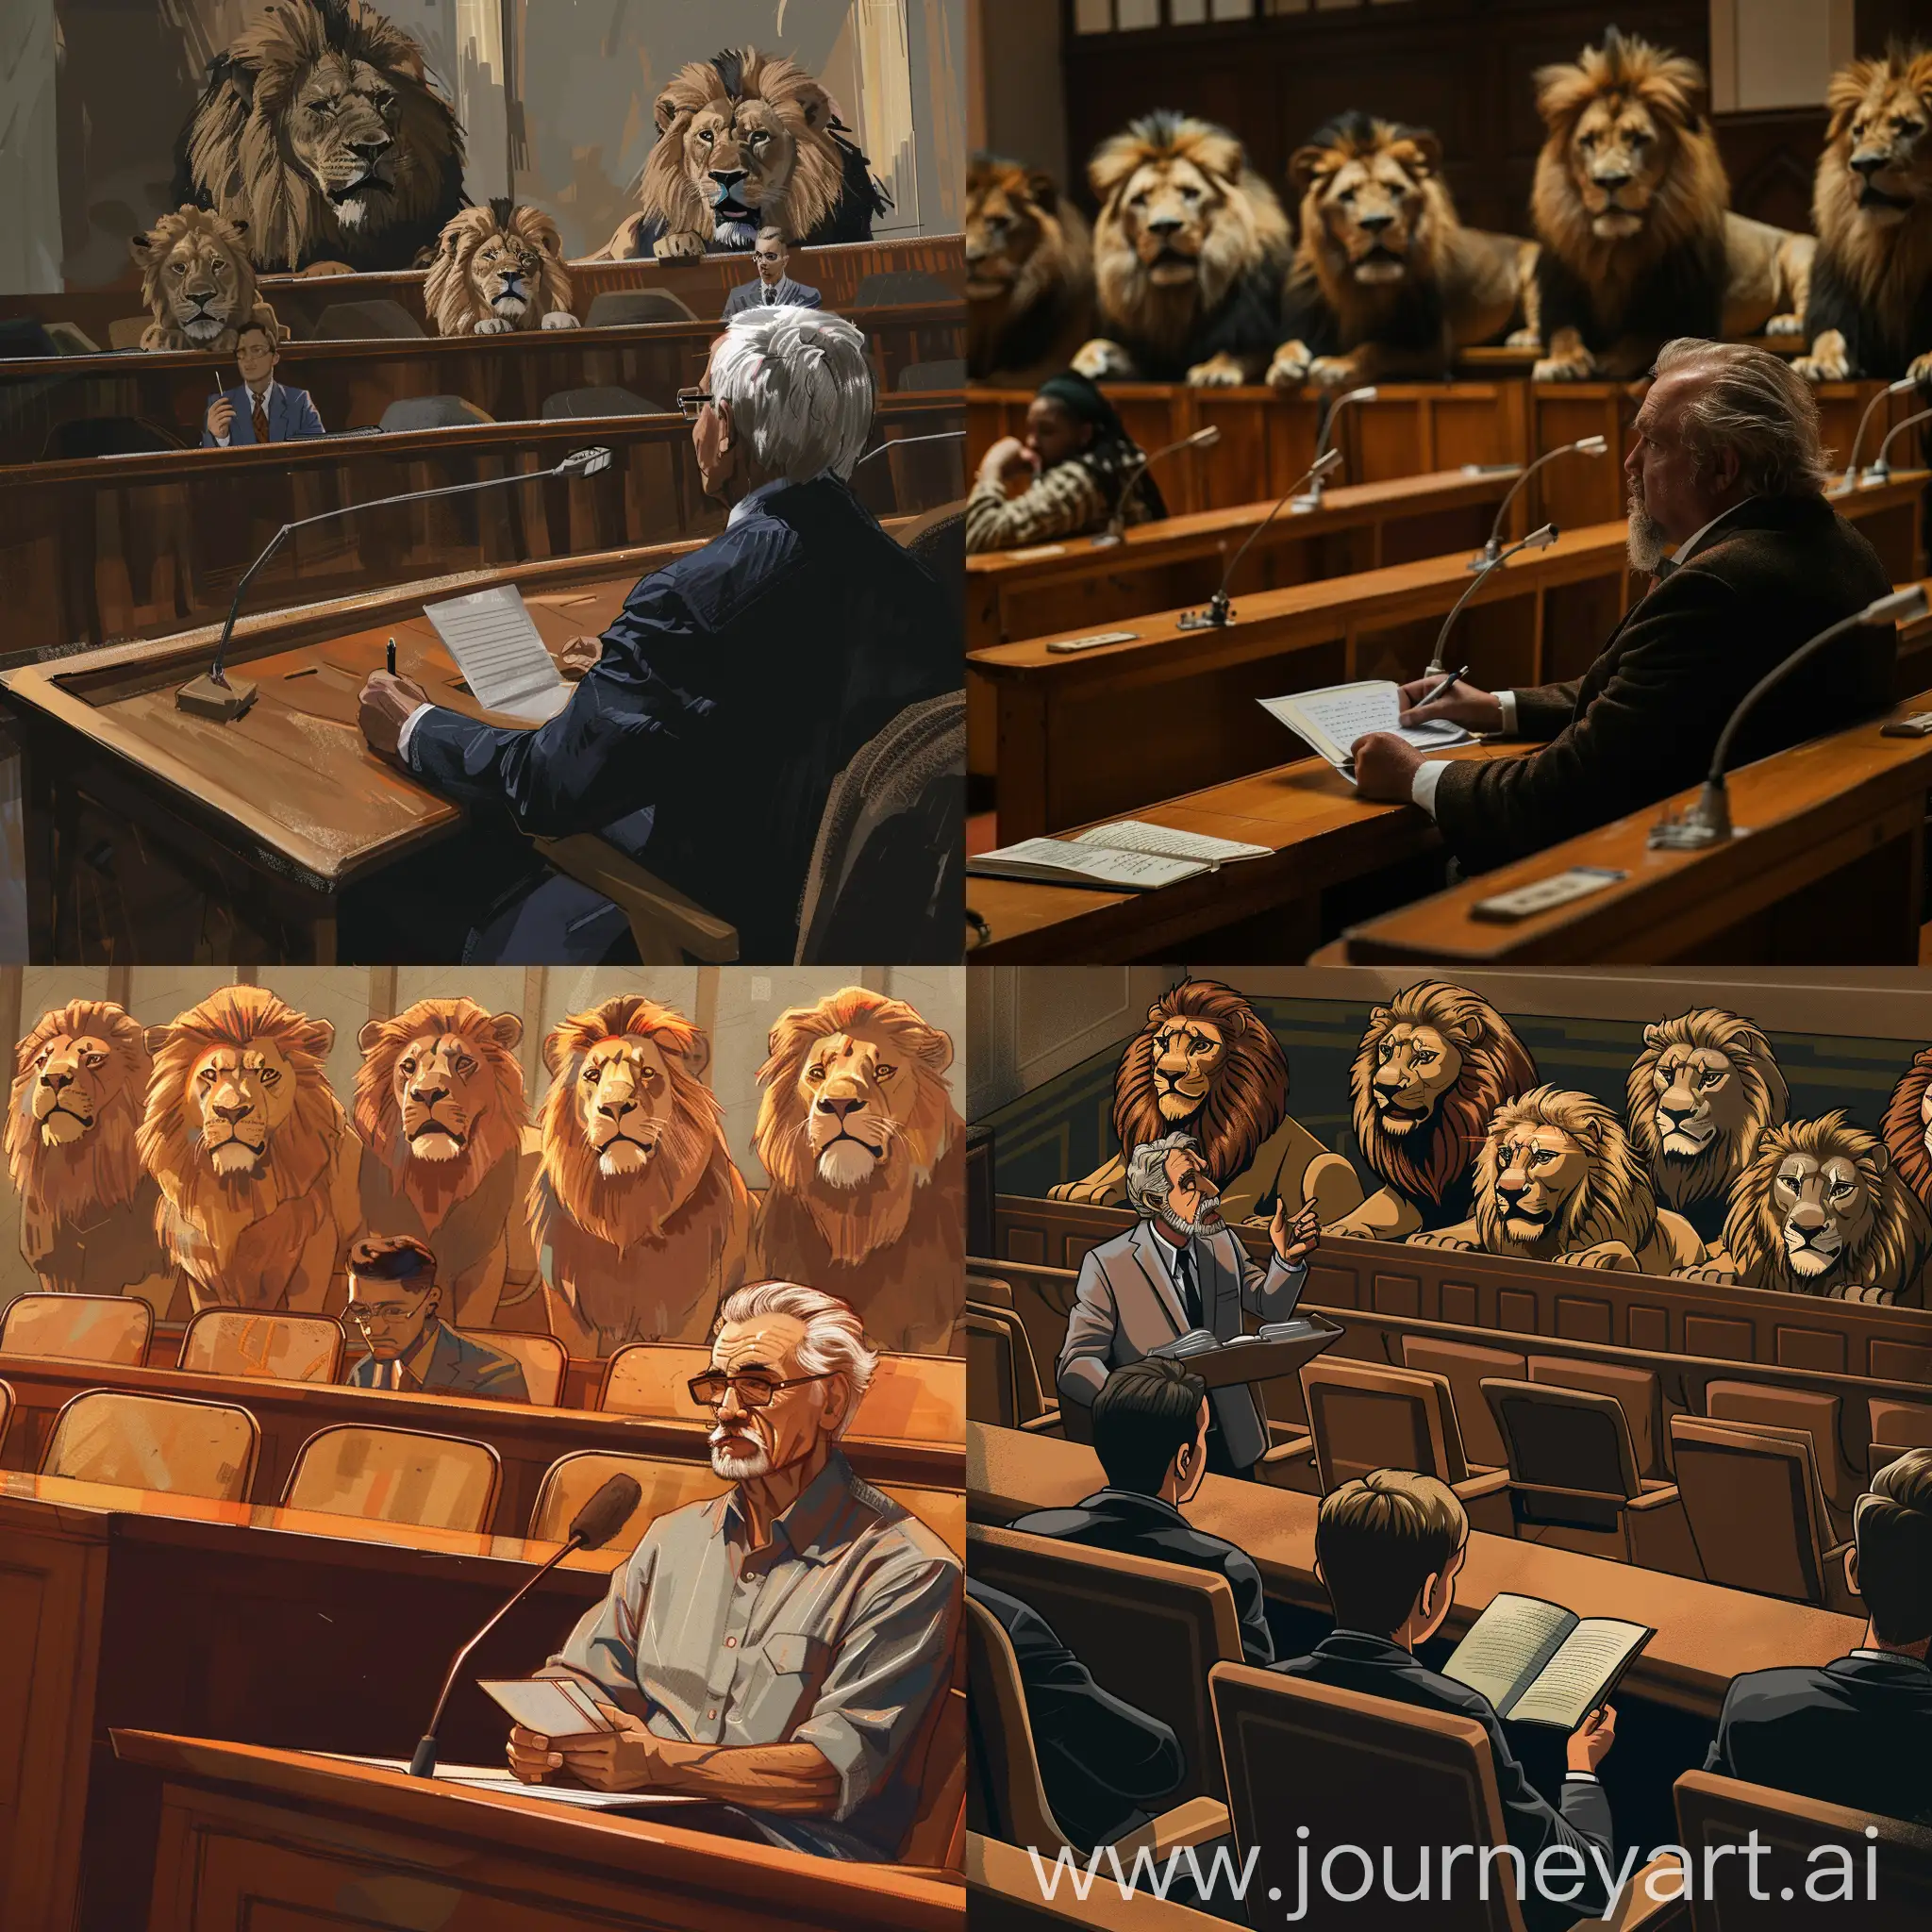 University-Professor-Lecturing-with-Lions-in-Audience